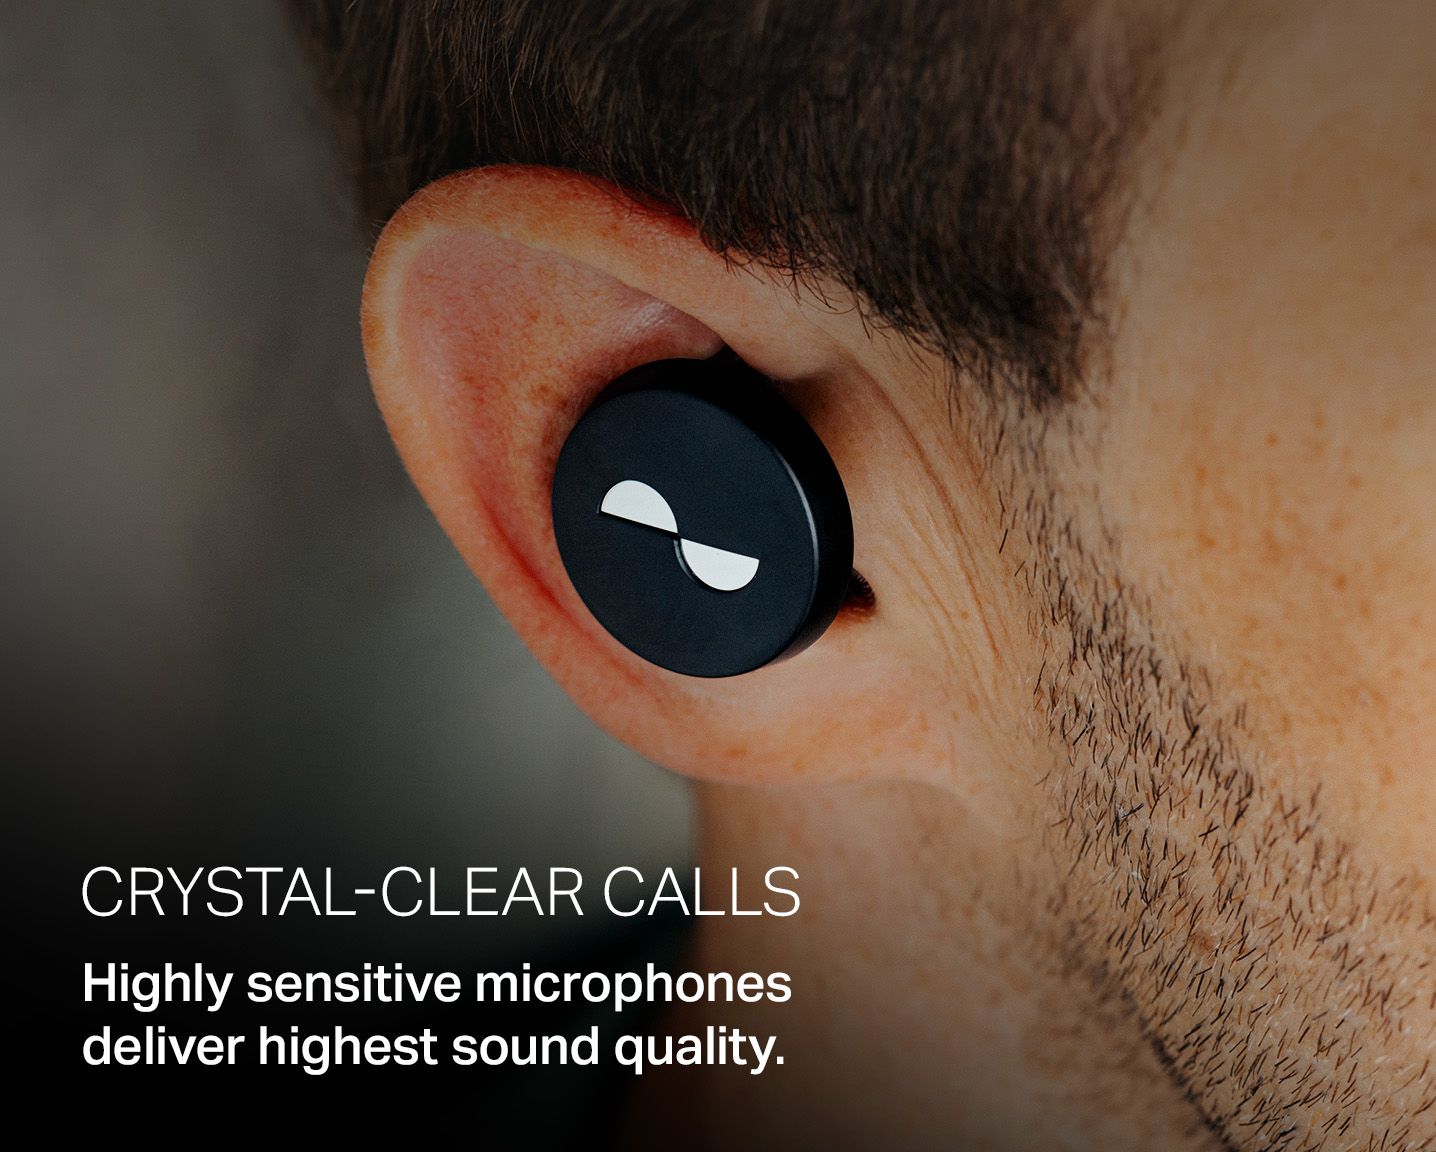 Close-up shot of the NURATRUE earbuds in an ear, with overlay text: "Crystal-clear calls. Highly sensitive microphones deliver highest sound quality."